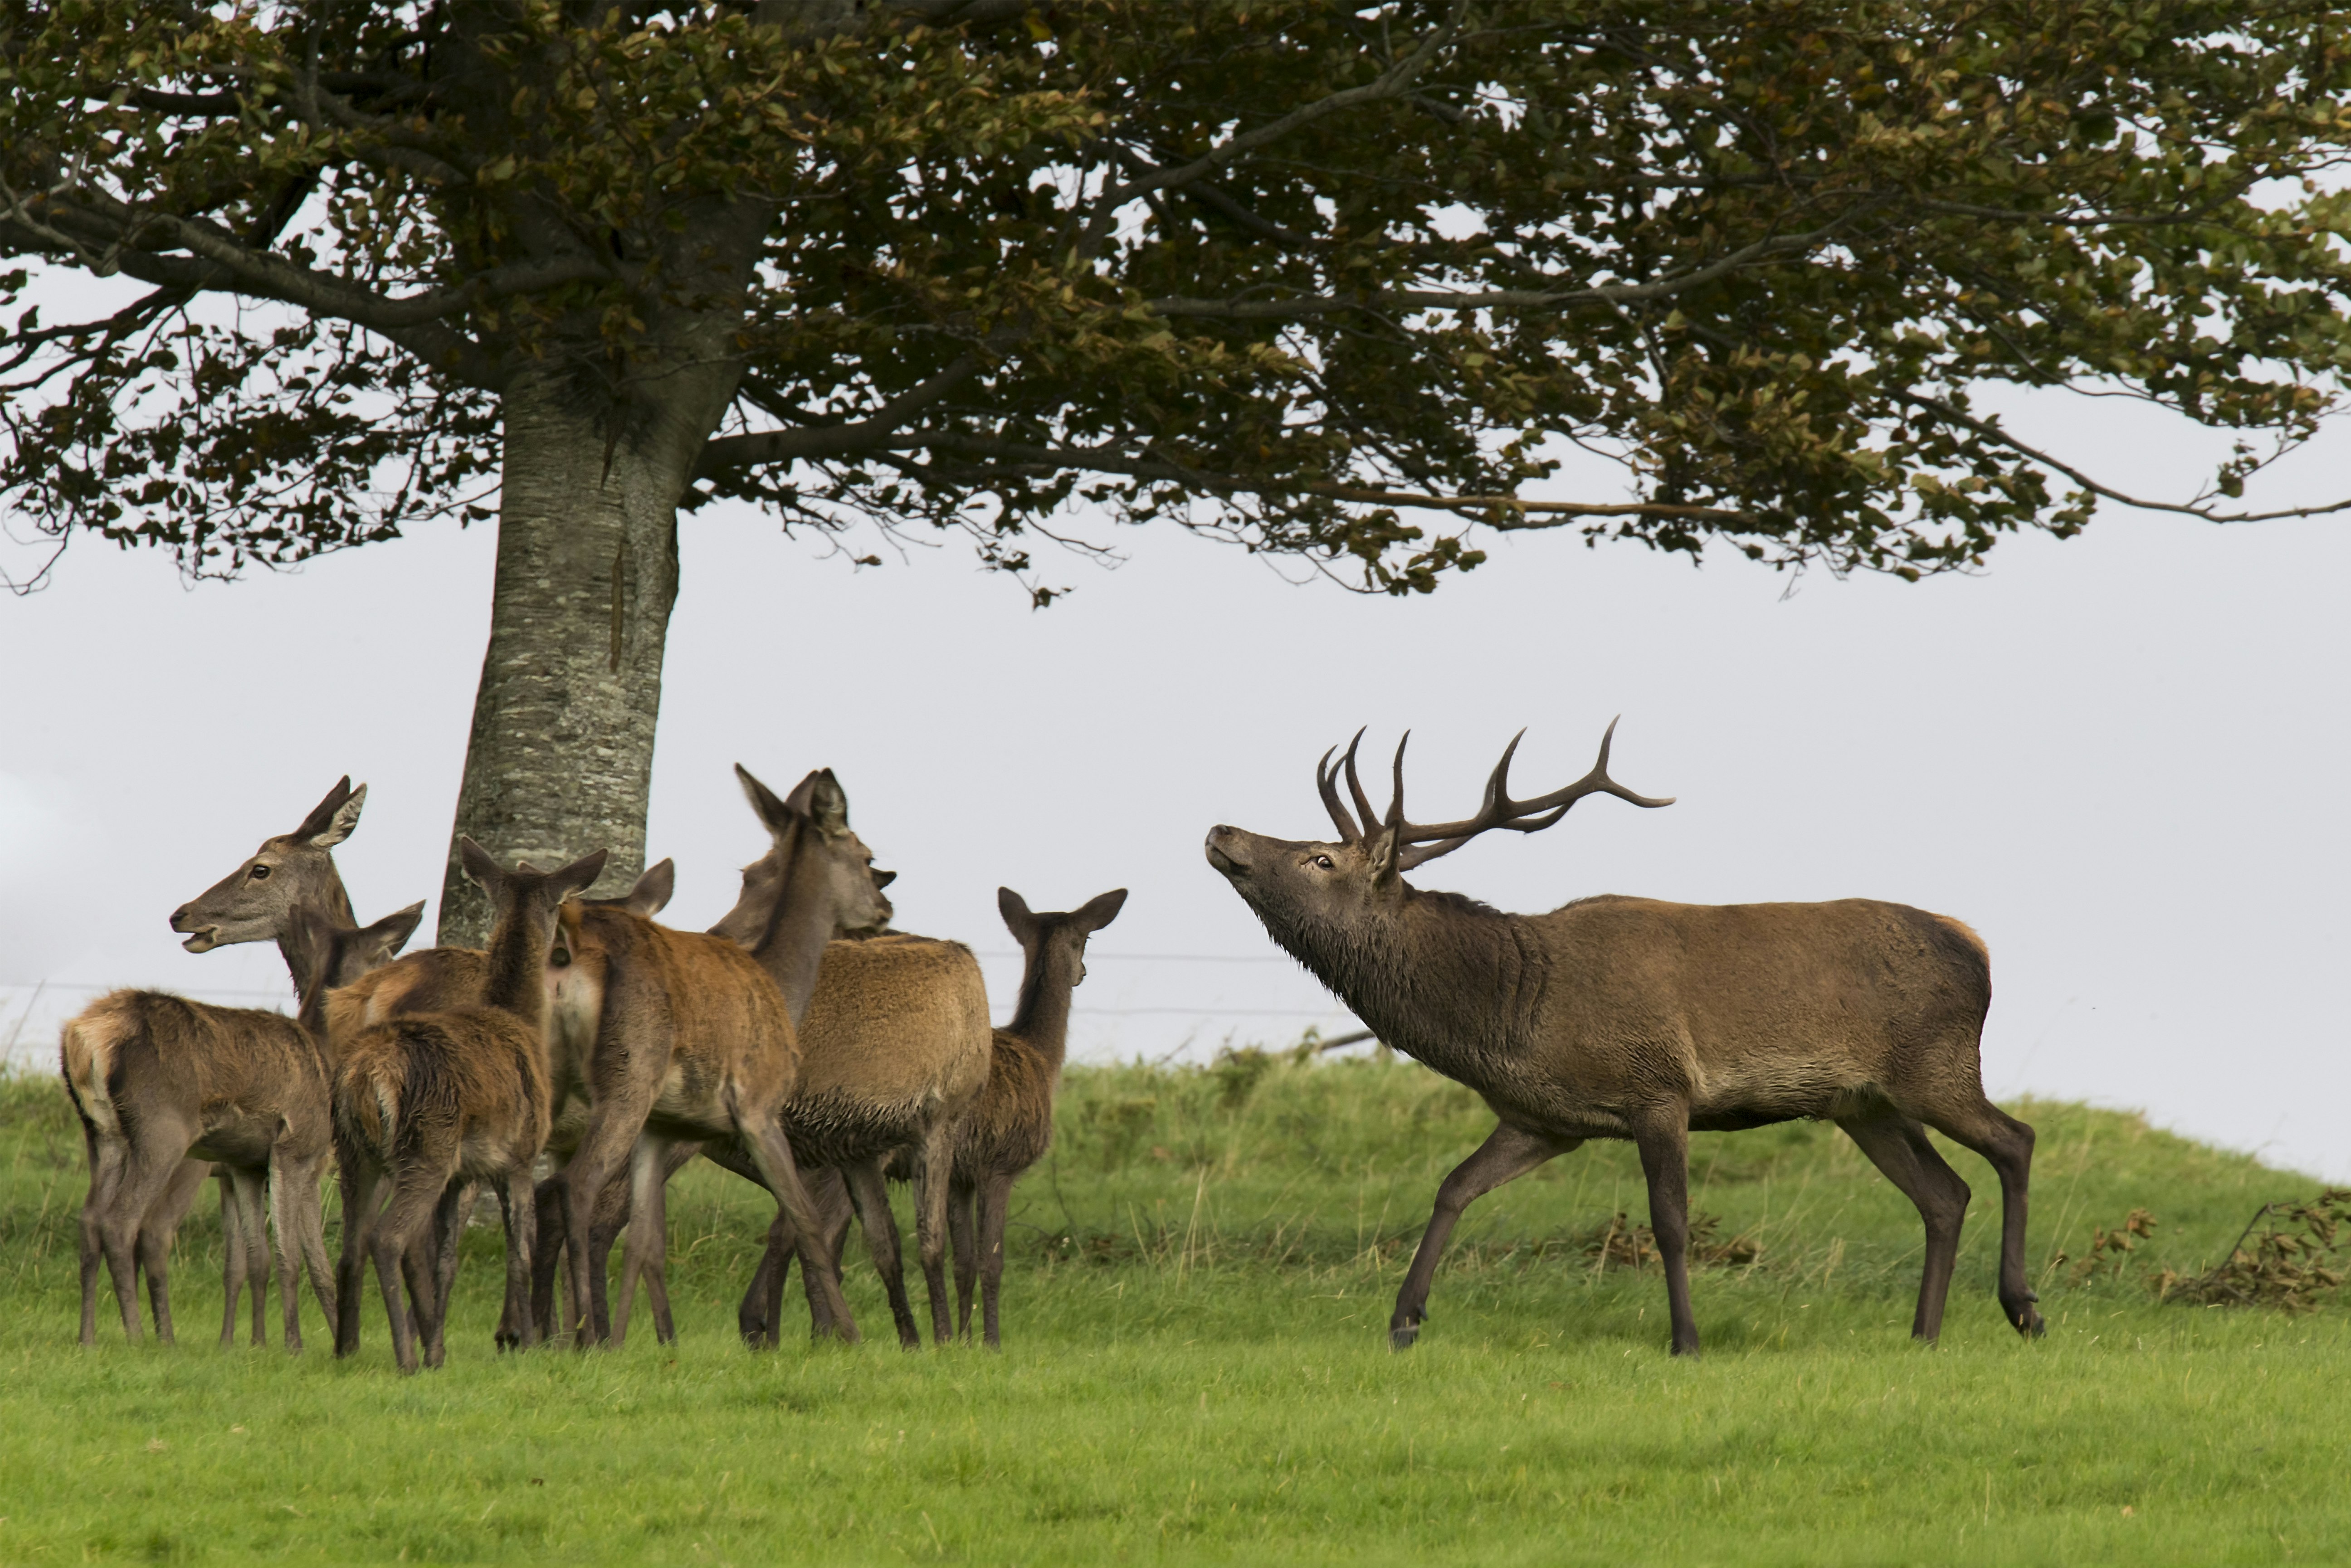 A cluster of Irish deer, including one stag on the right facing left, and a group of half a dozen doe and fawns standing around a tree in County Kerry